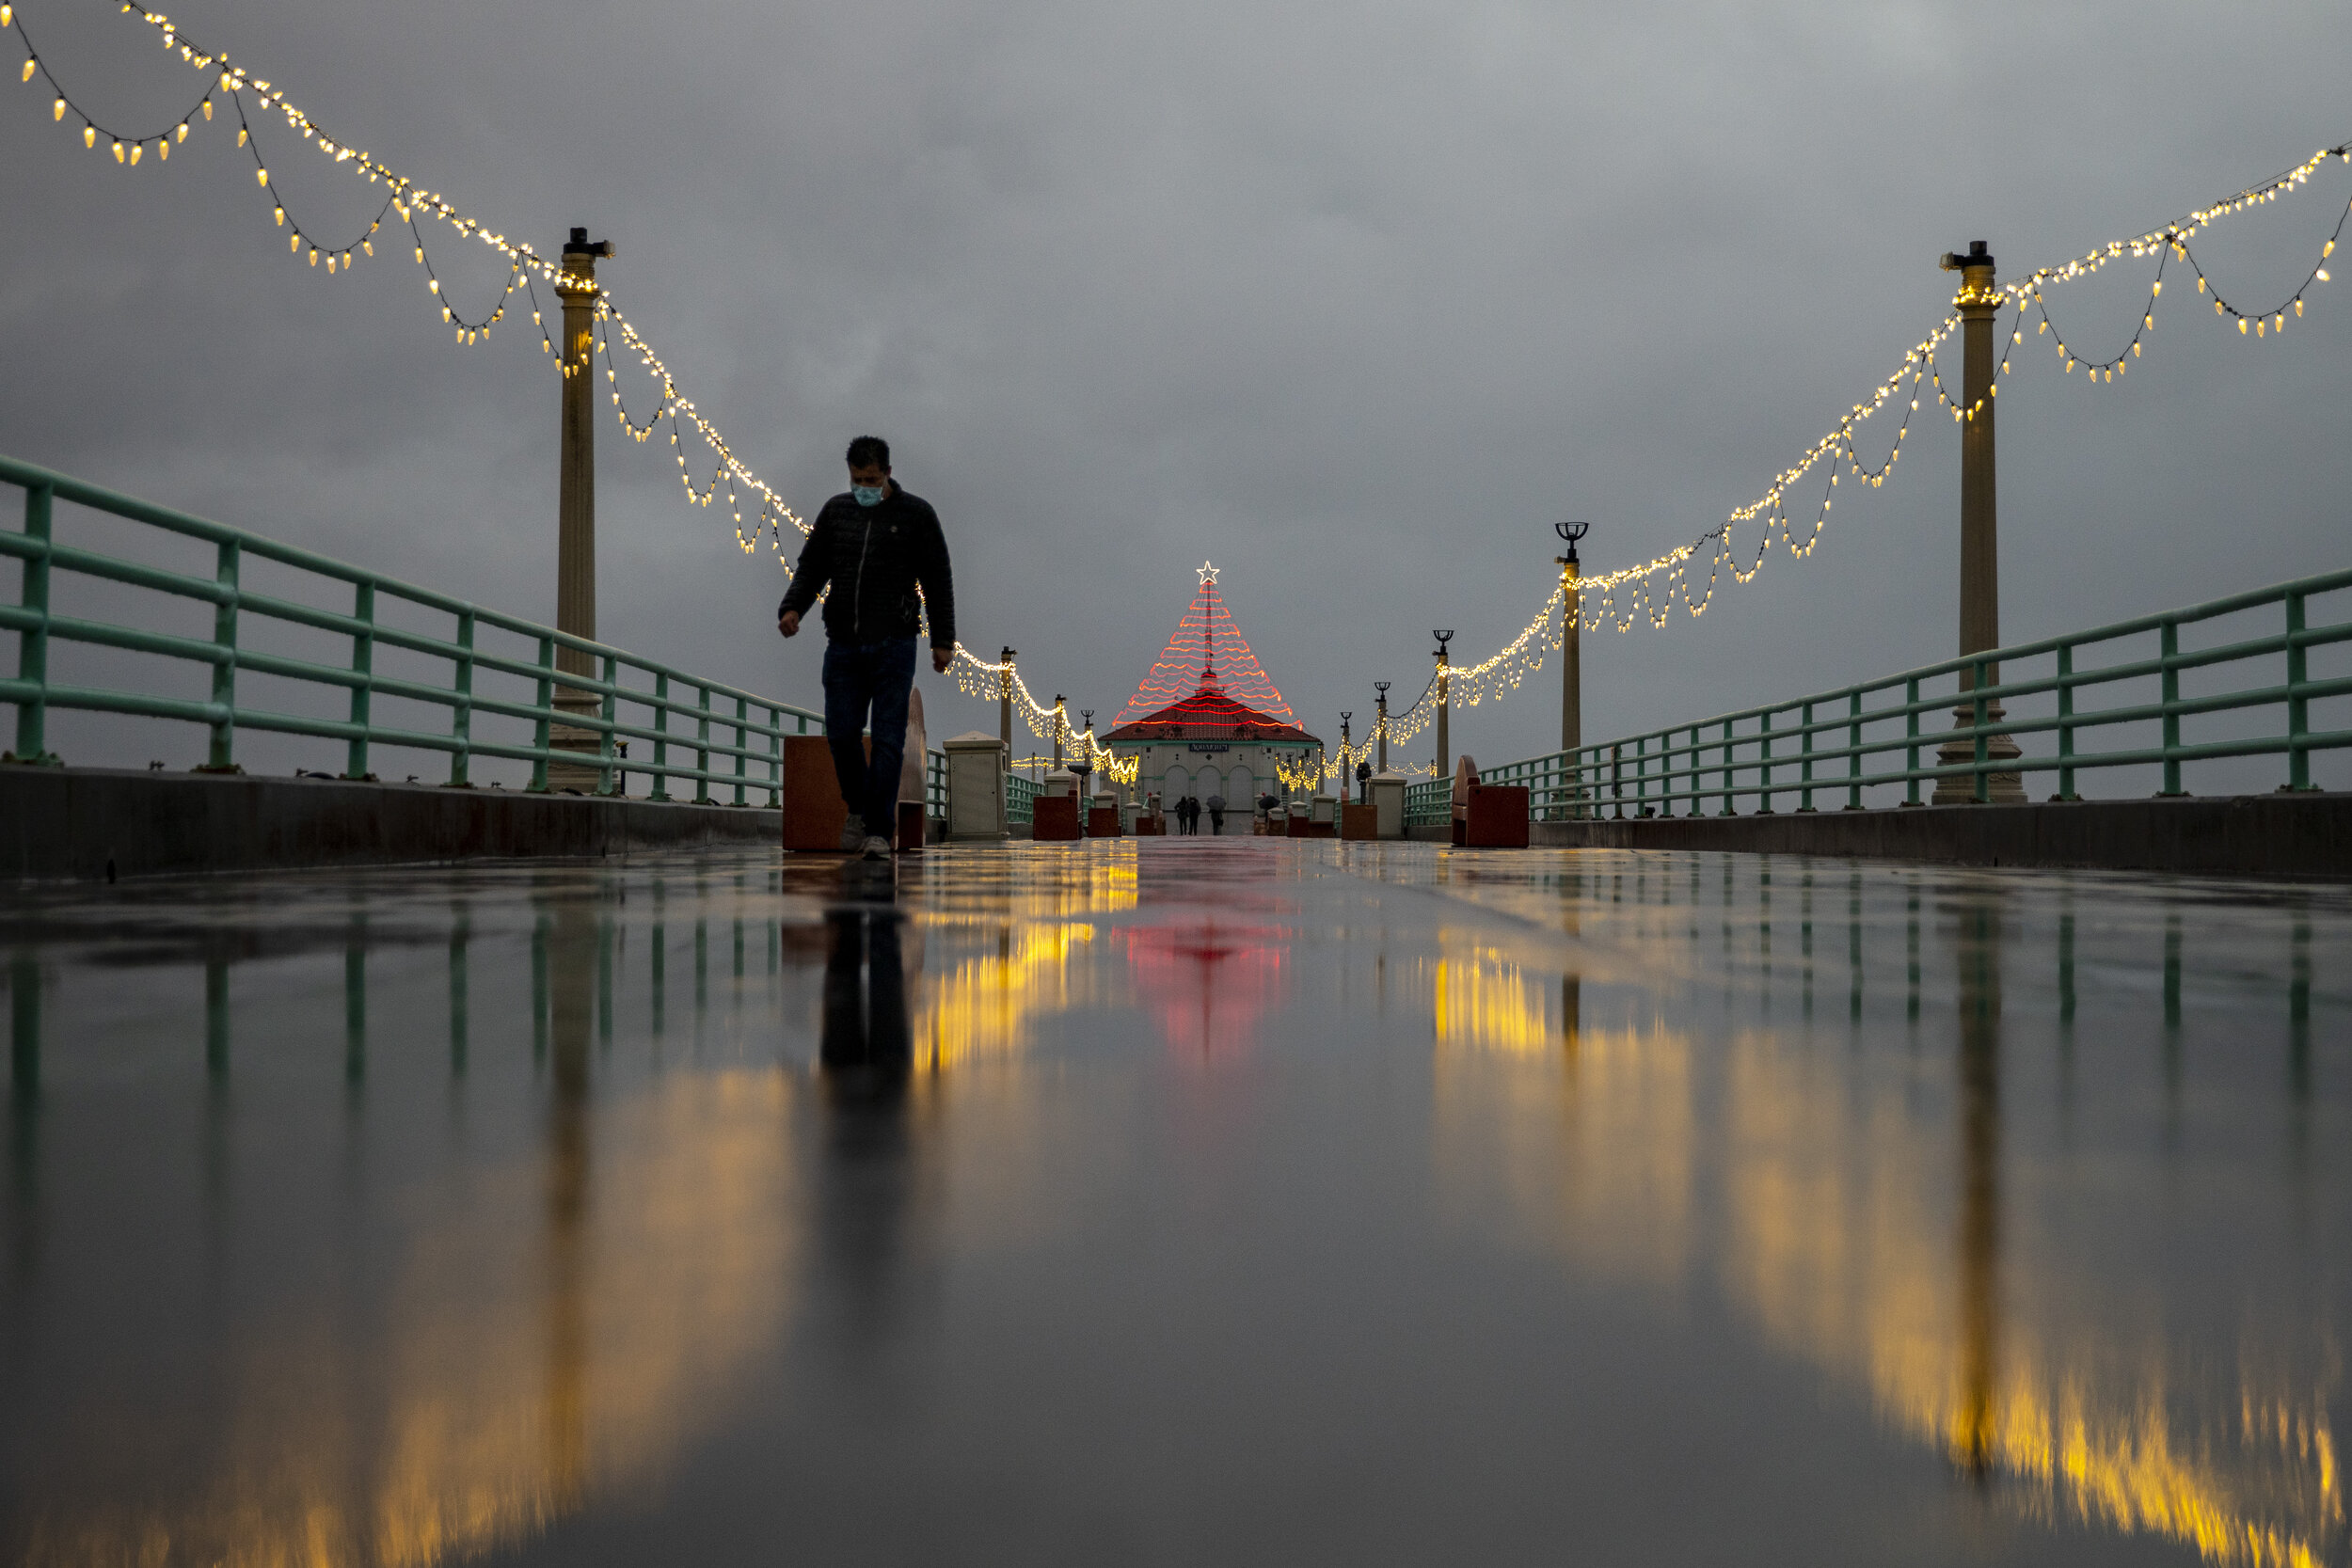  Winter arrives and in the final days of the year, rain soaks Southern California, including the Manhattan Beach Pier, still adorned with holiday lights. The coronavirus continued infecting the world’s population for 10 months of 2020, as humanity lo